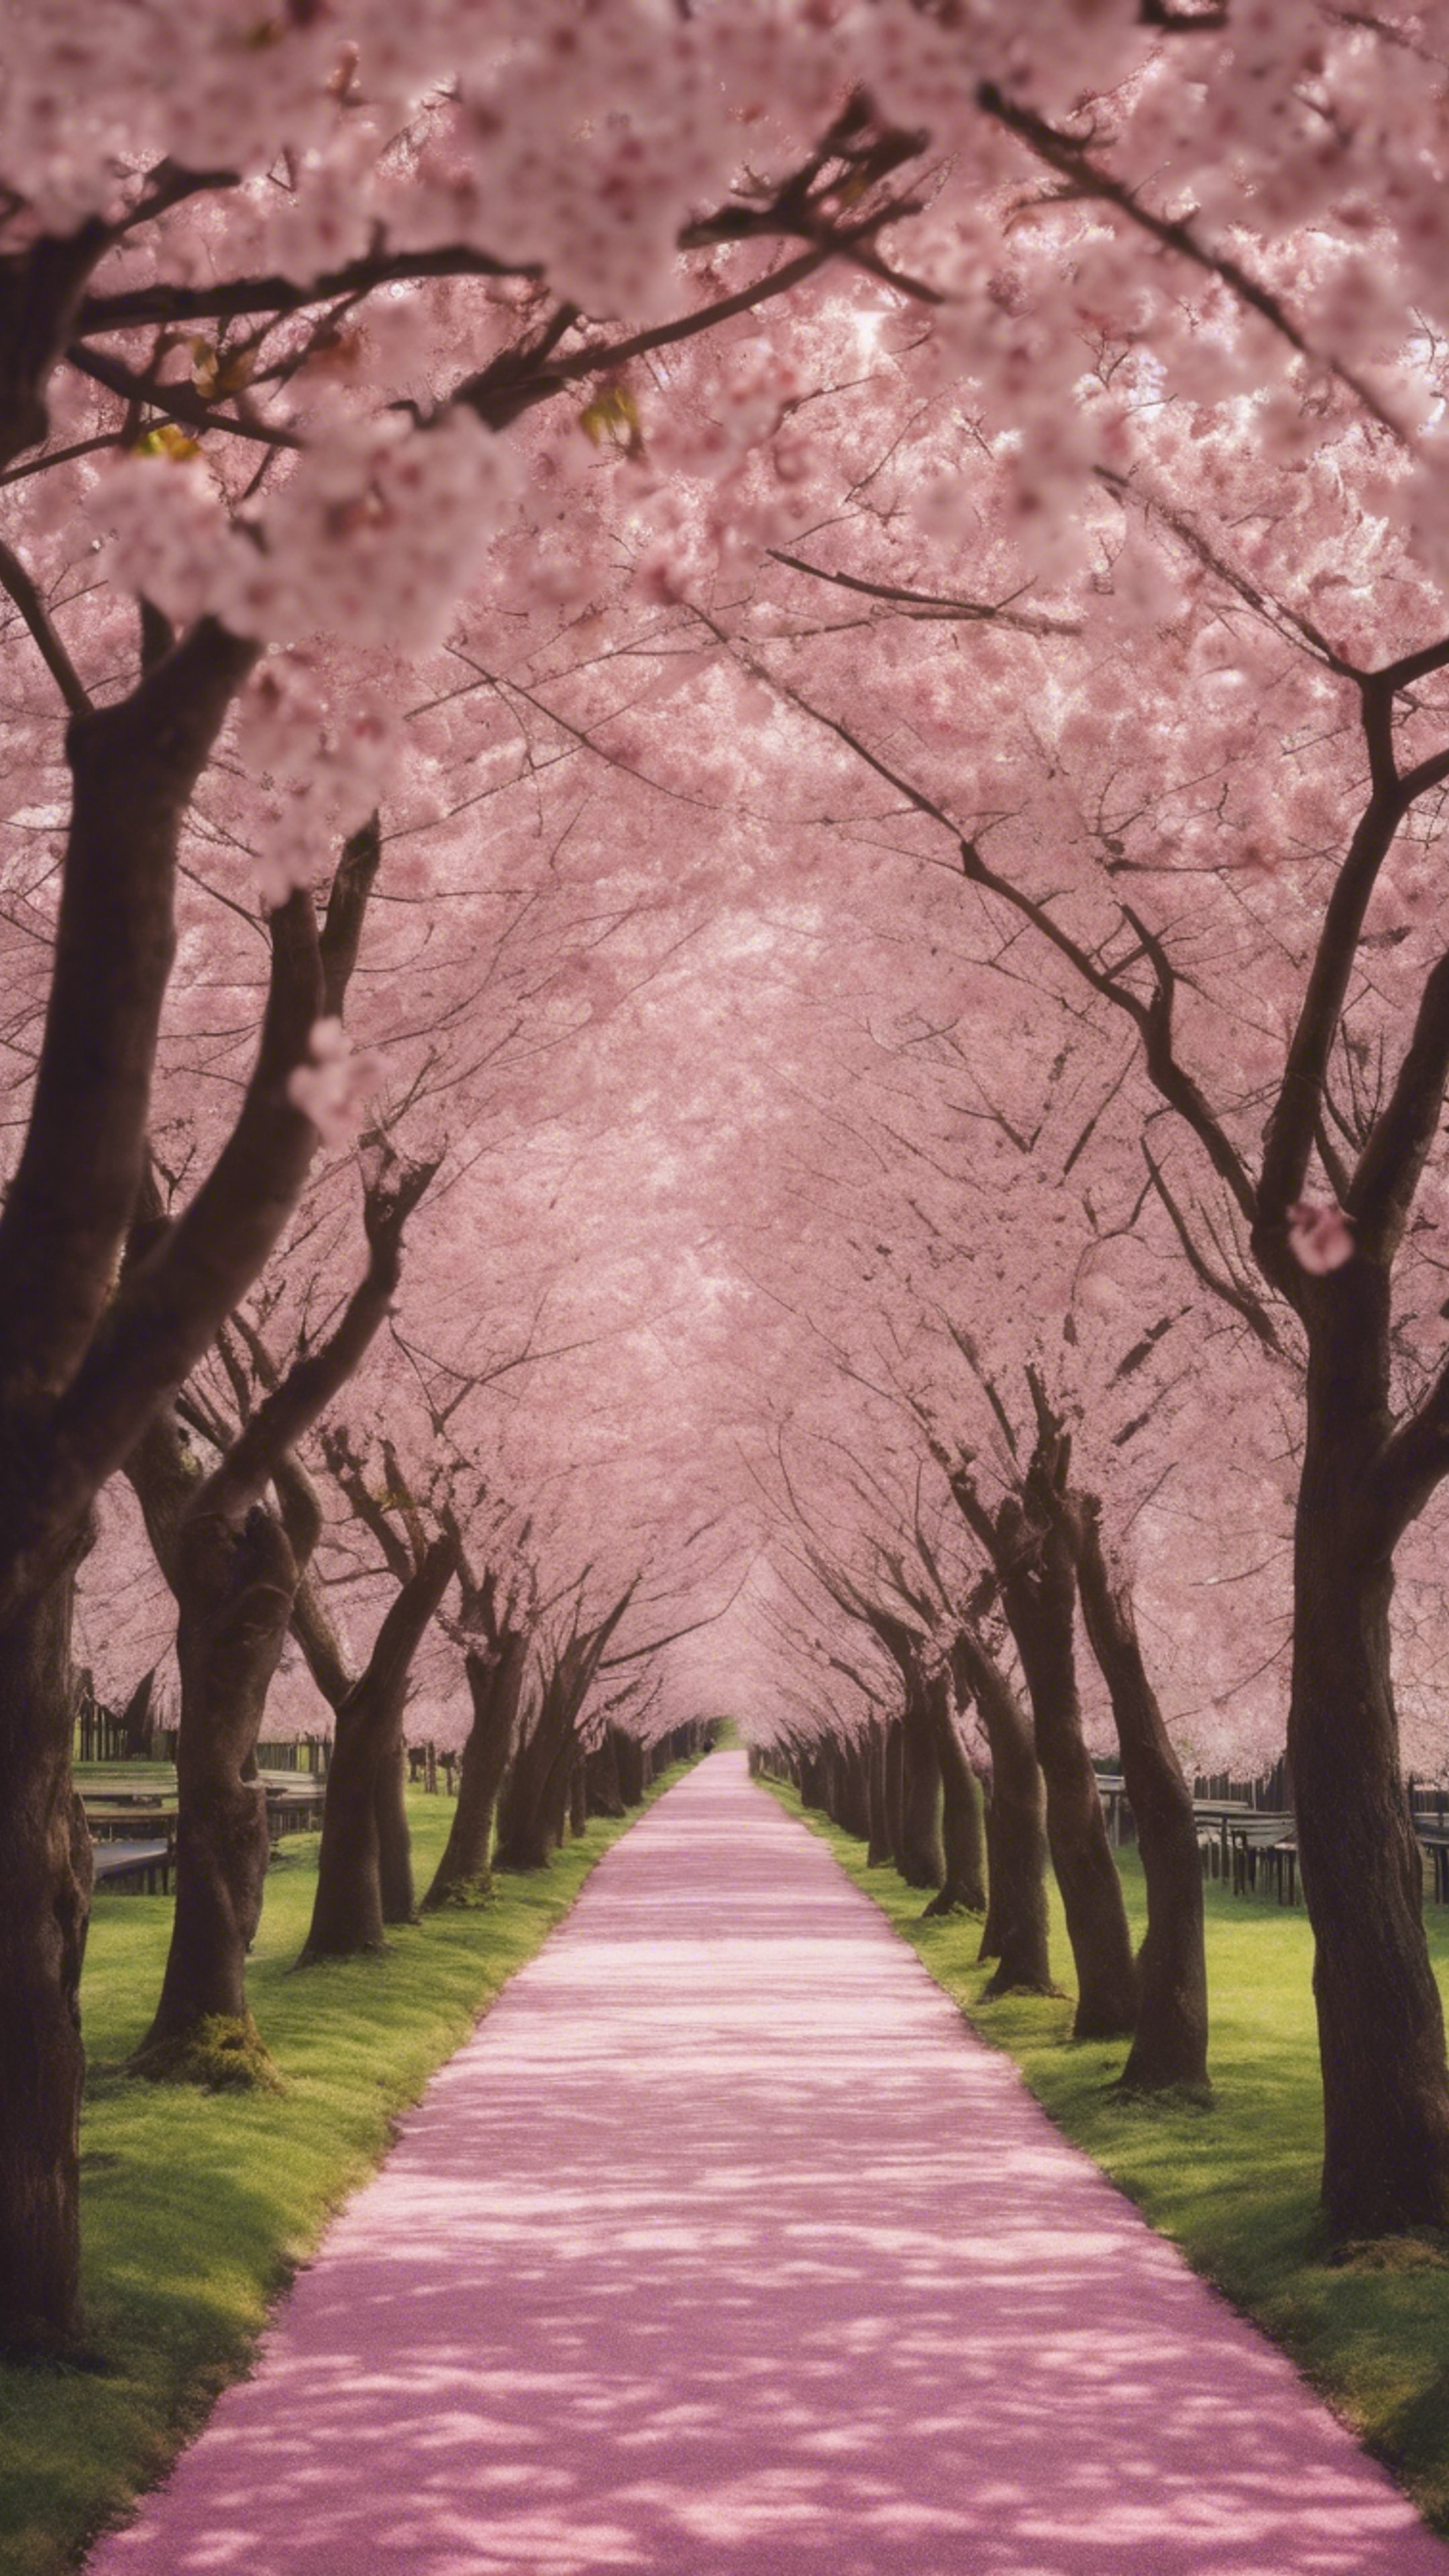 Canopies of cherry blossom trees creating a magnificent pink and white striped path in a tranquil garden.壁紙[b056f339baee4e38953e]